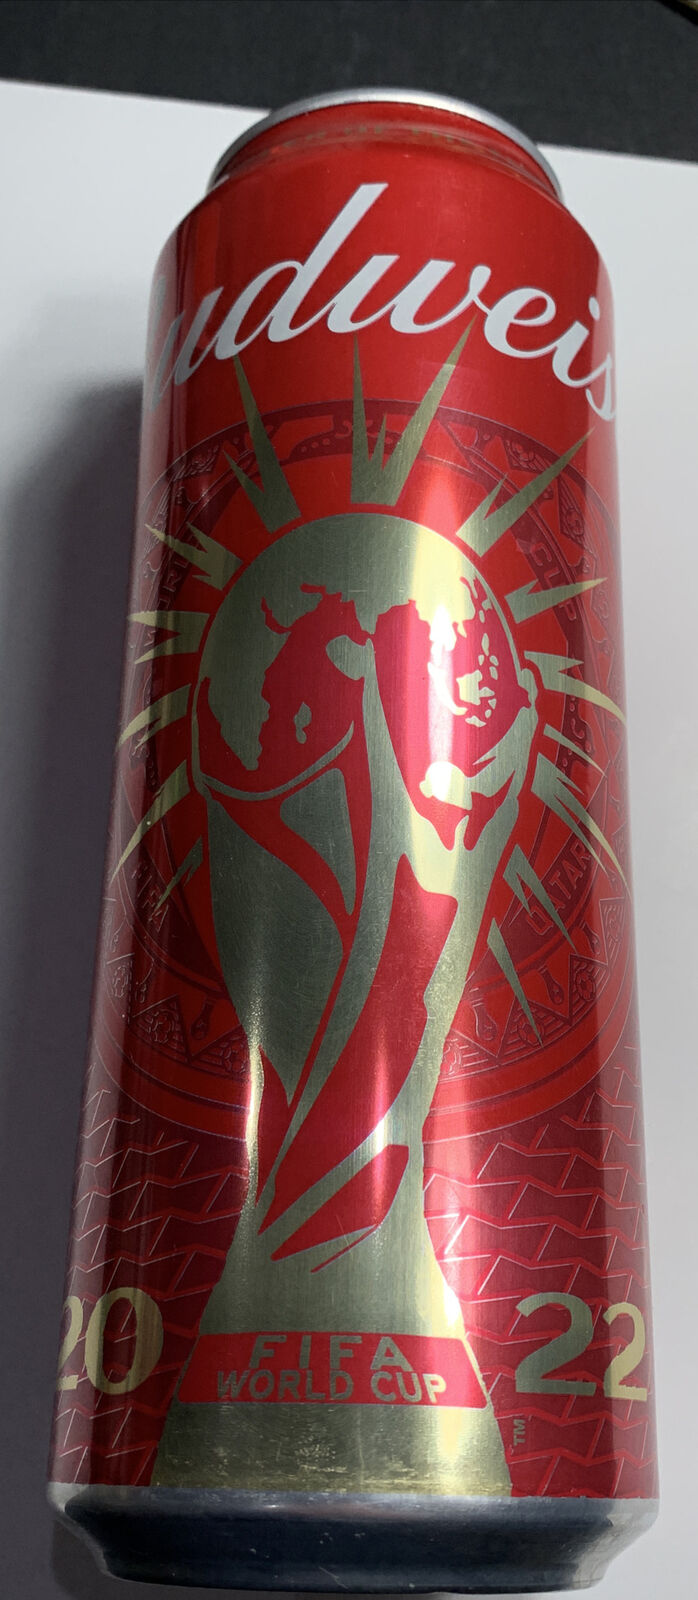 Budweiser Commemorative 25 Oz Beer Can 2022 FIFA World Cup Bottom Opened